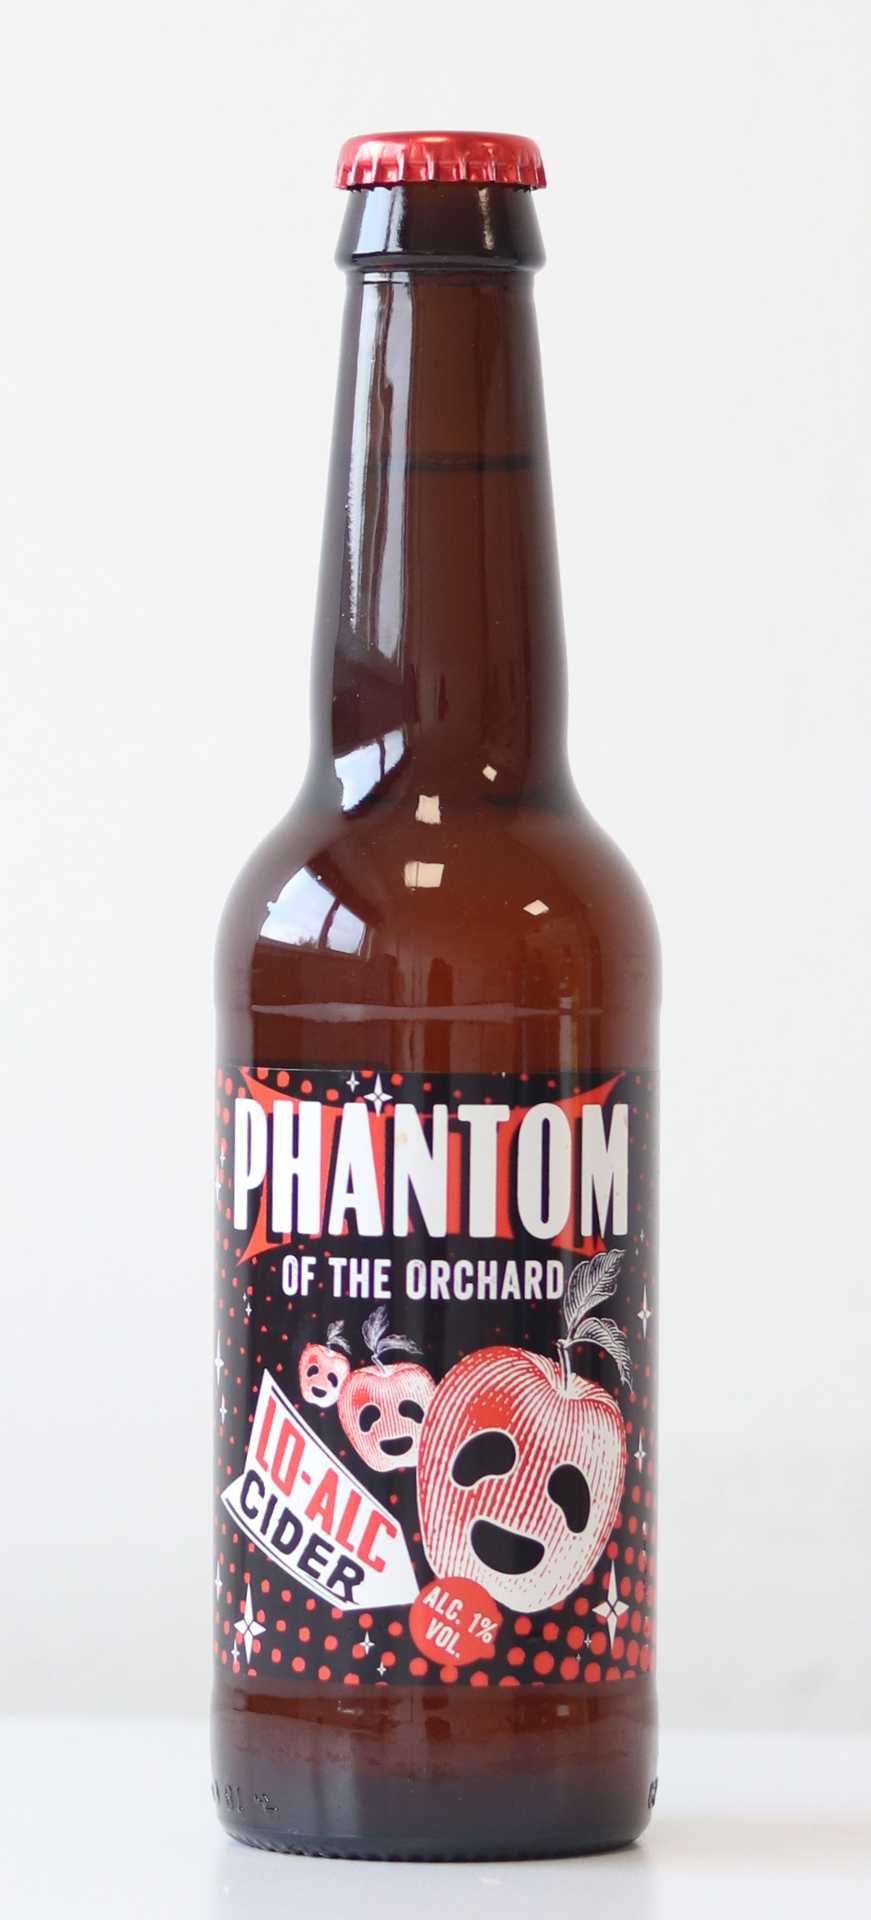 Phantom of the Orchard Lo-Alcohol Cider, Cotswold Cider Co.